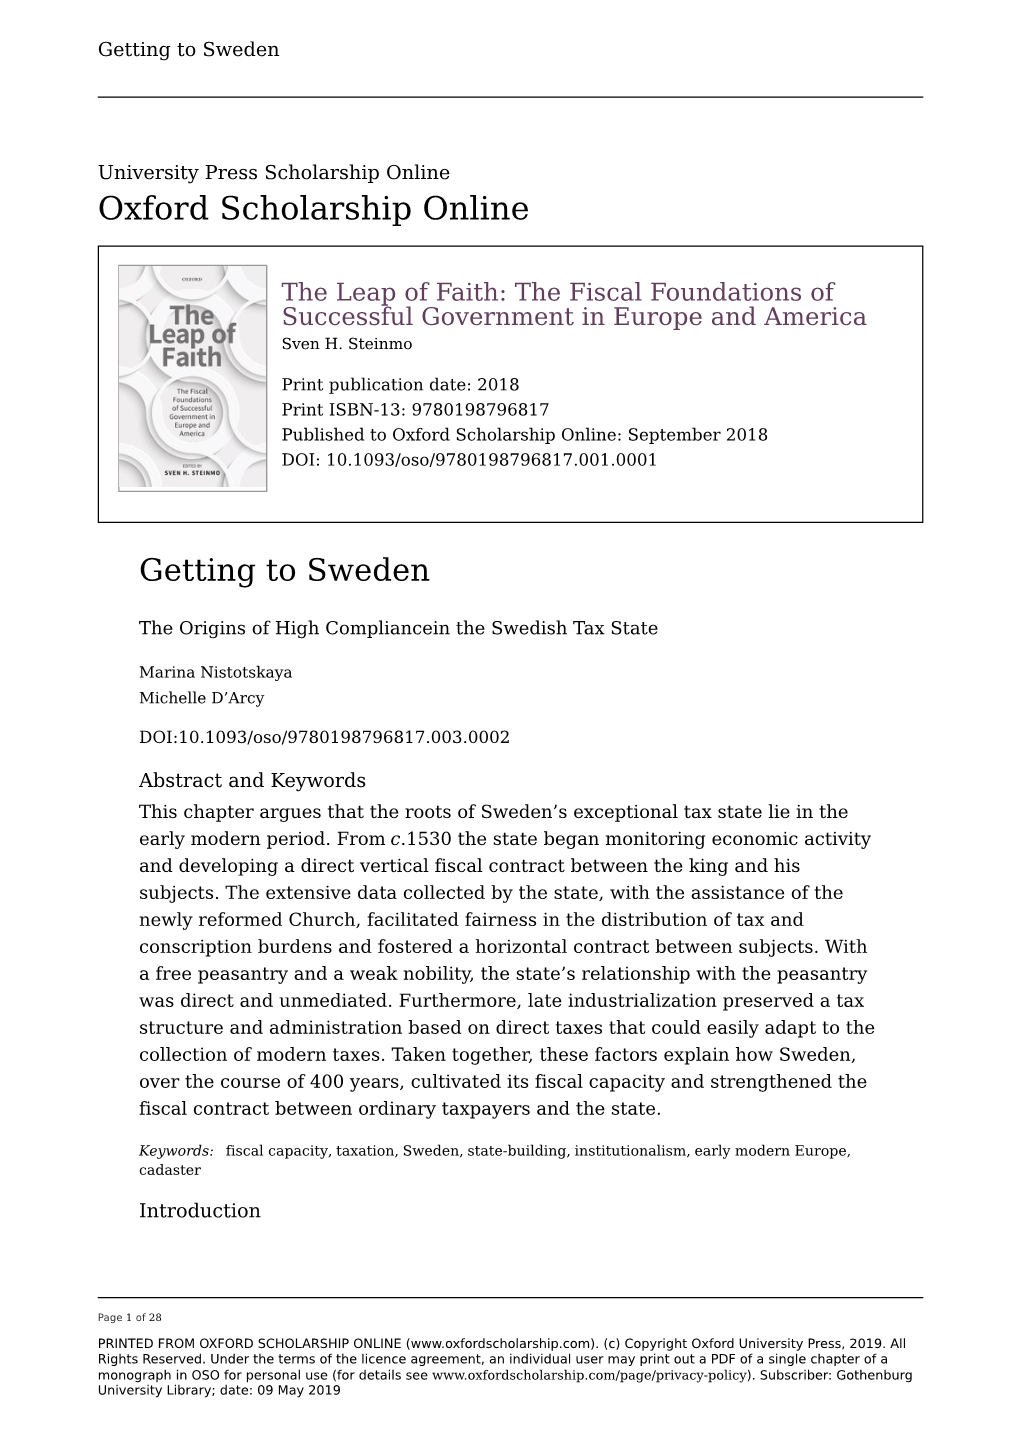 The Origins of High Compliancein the Swedish Tax State